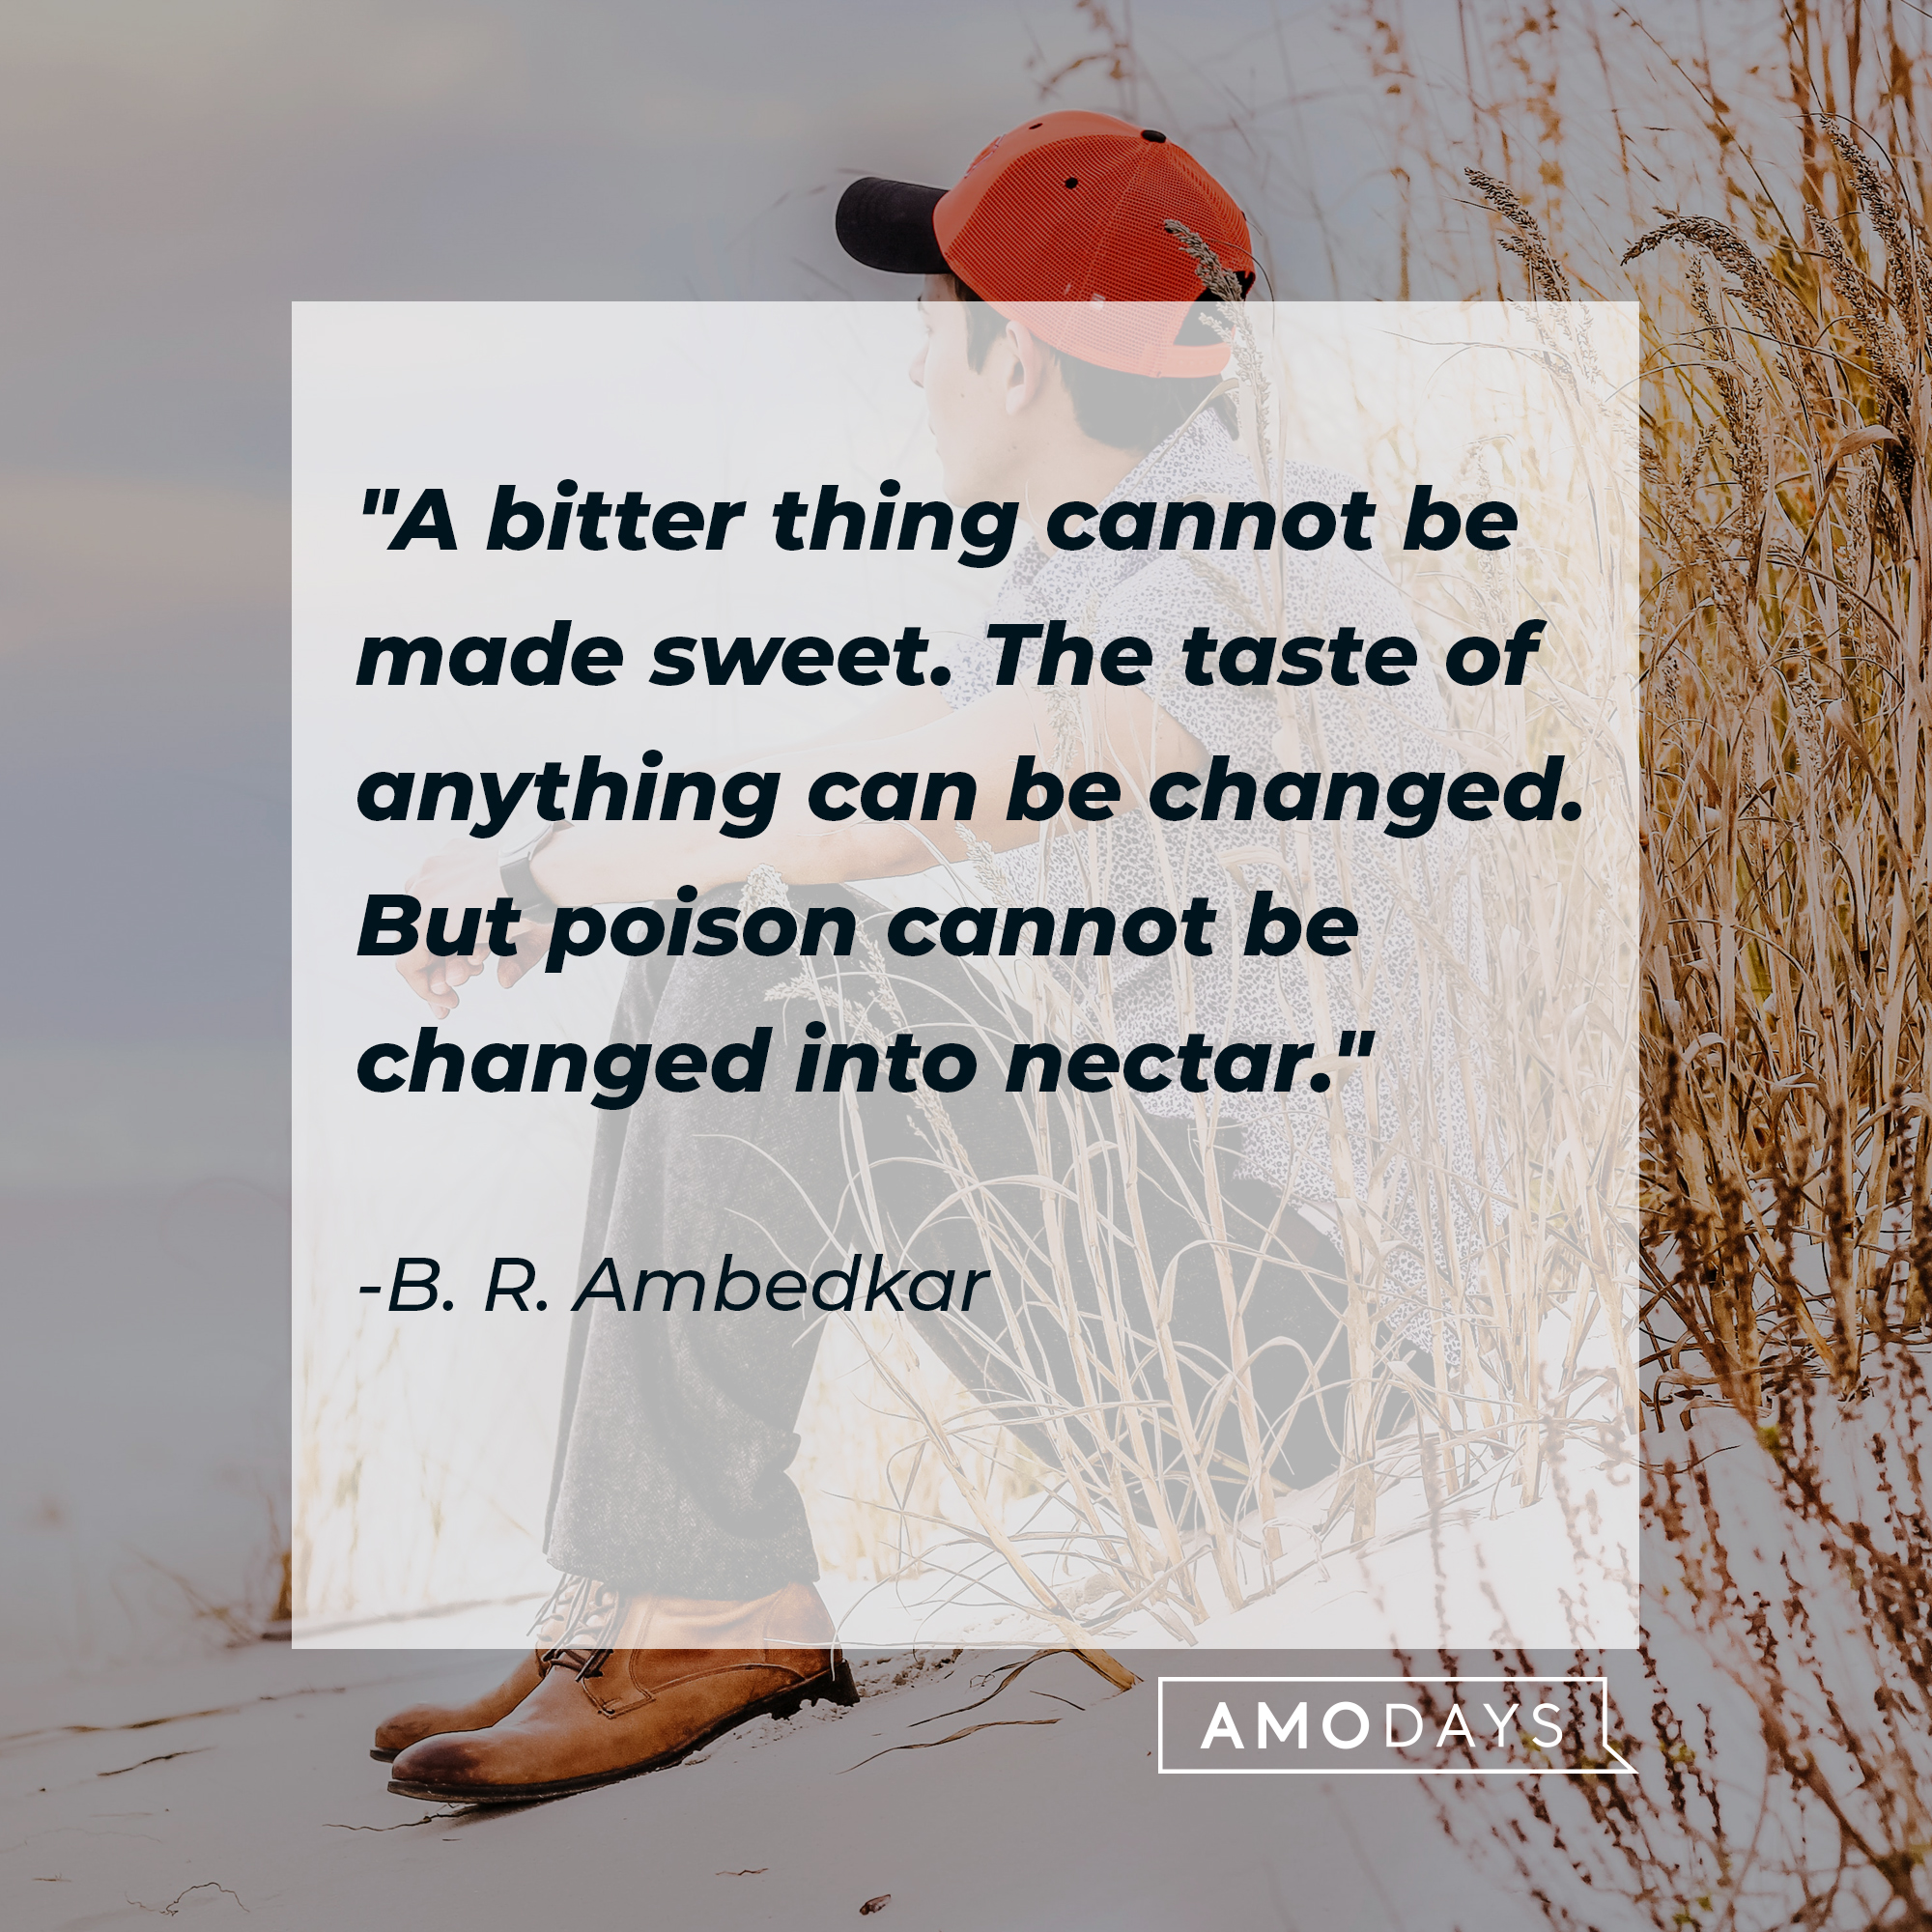 B. R. Ambedkar's quote: "A bitter thing cannot be made sweet. The taste of anything can be changed. But poison cannot be changed into nectar." | Source: Unsplash